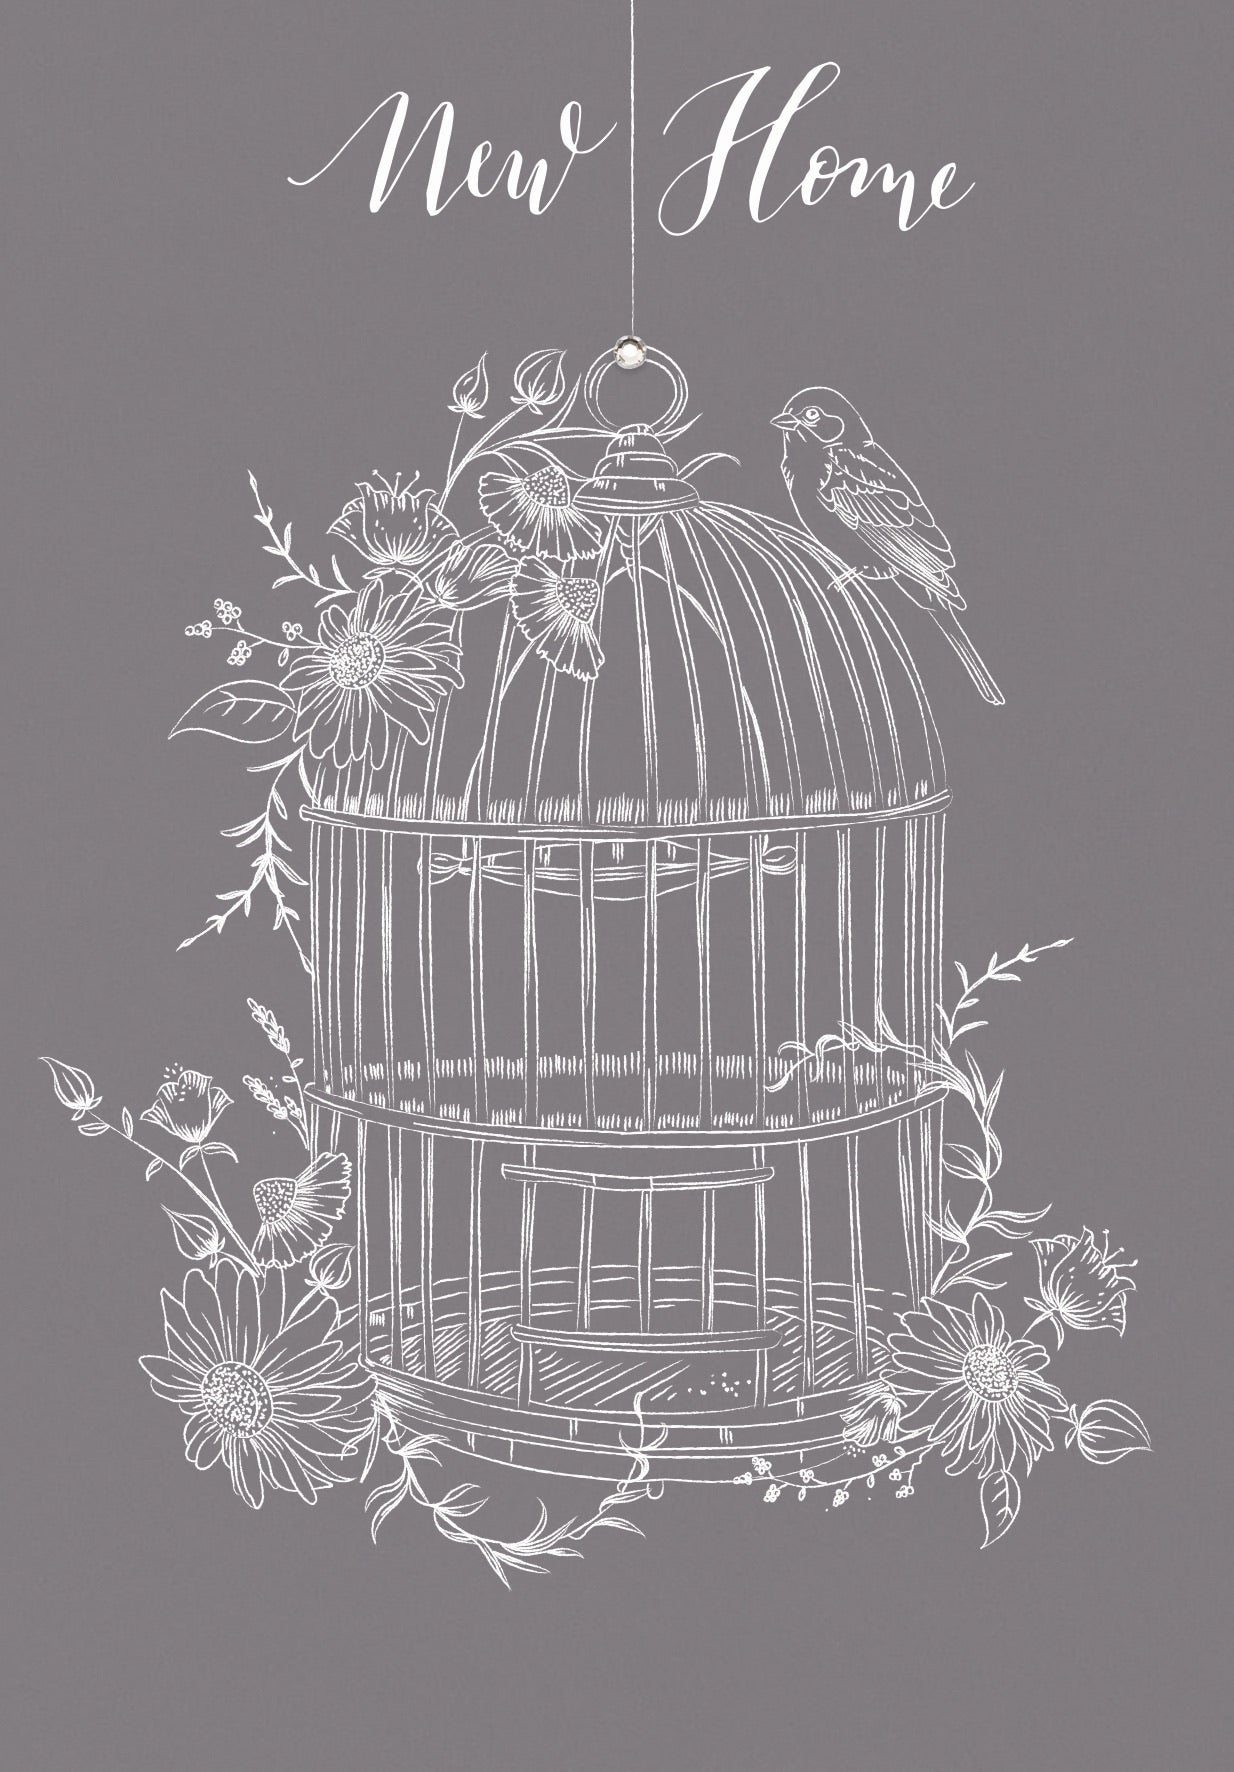 The Handcrafted Card Company New Home Birdcage Card